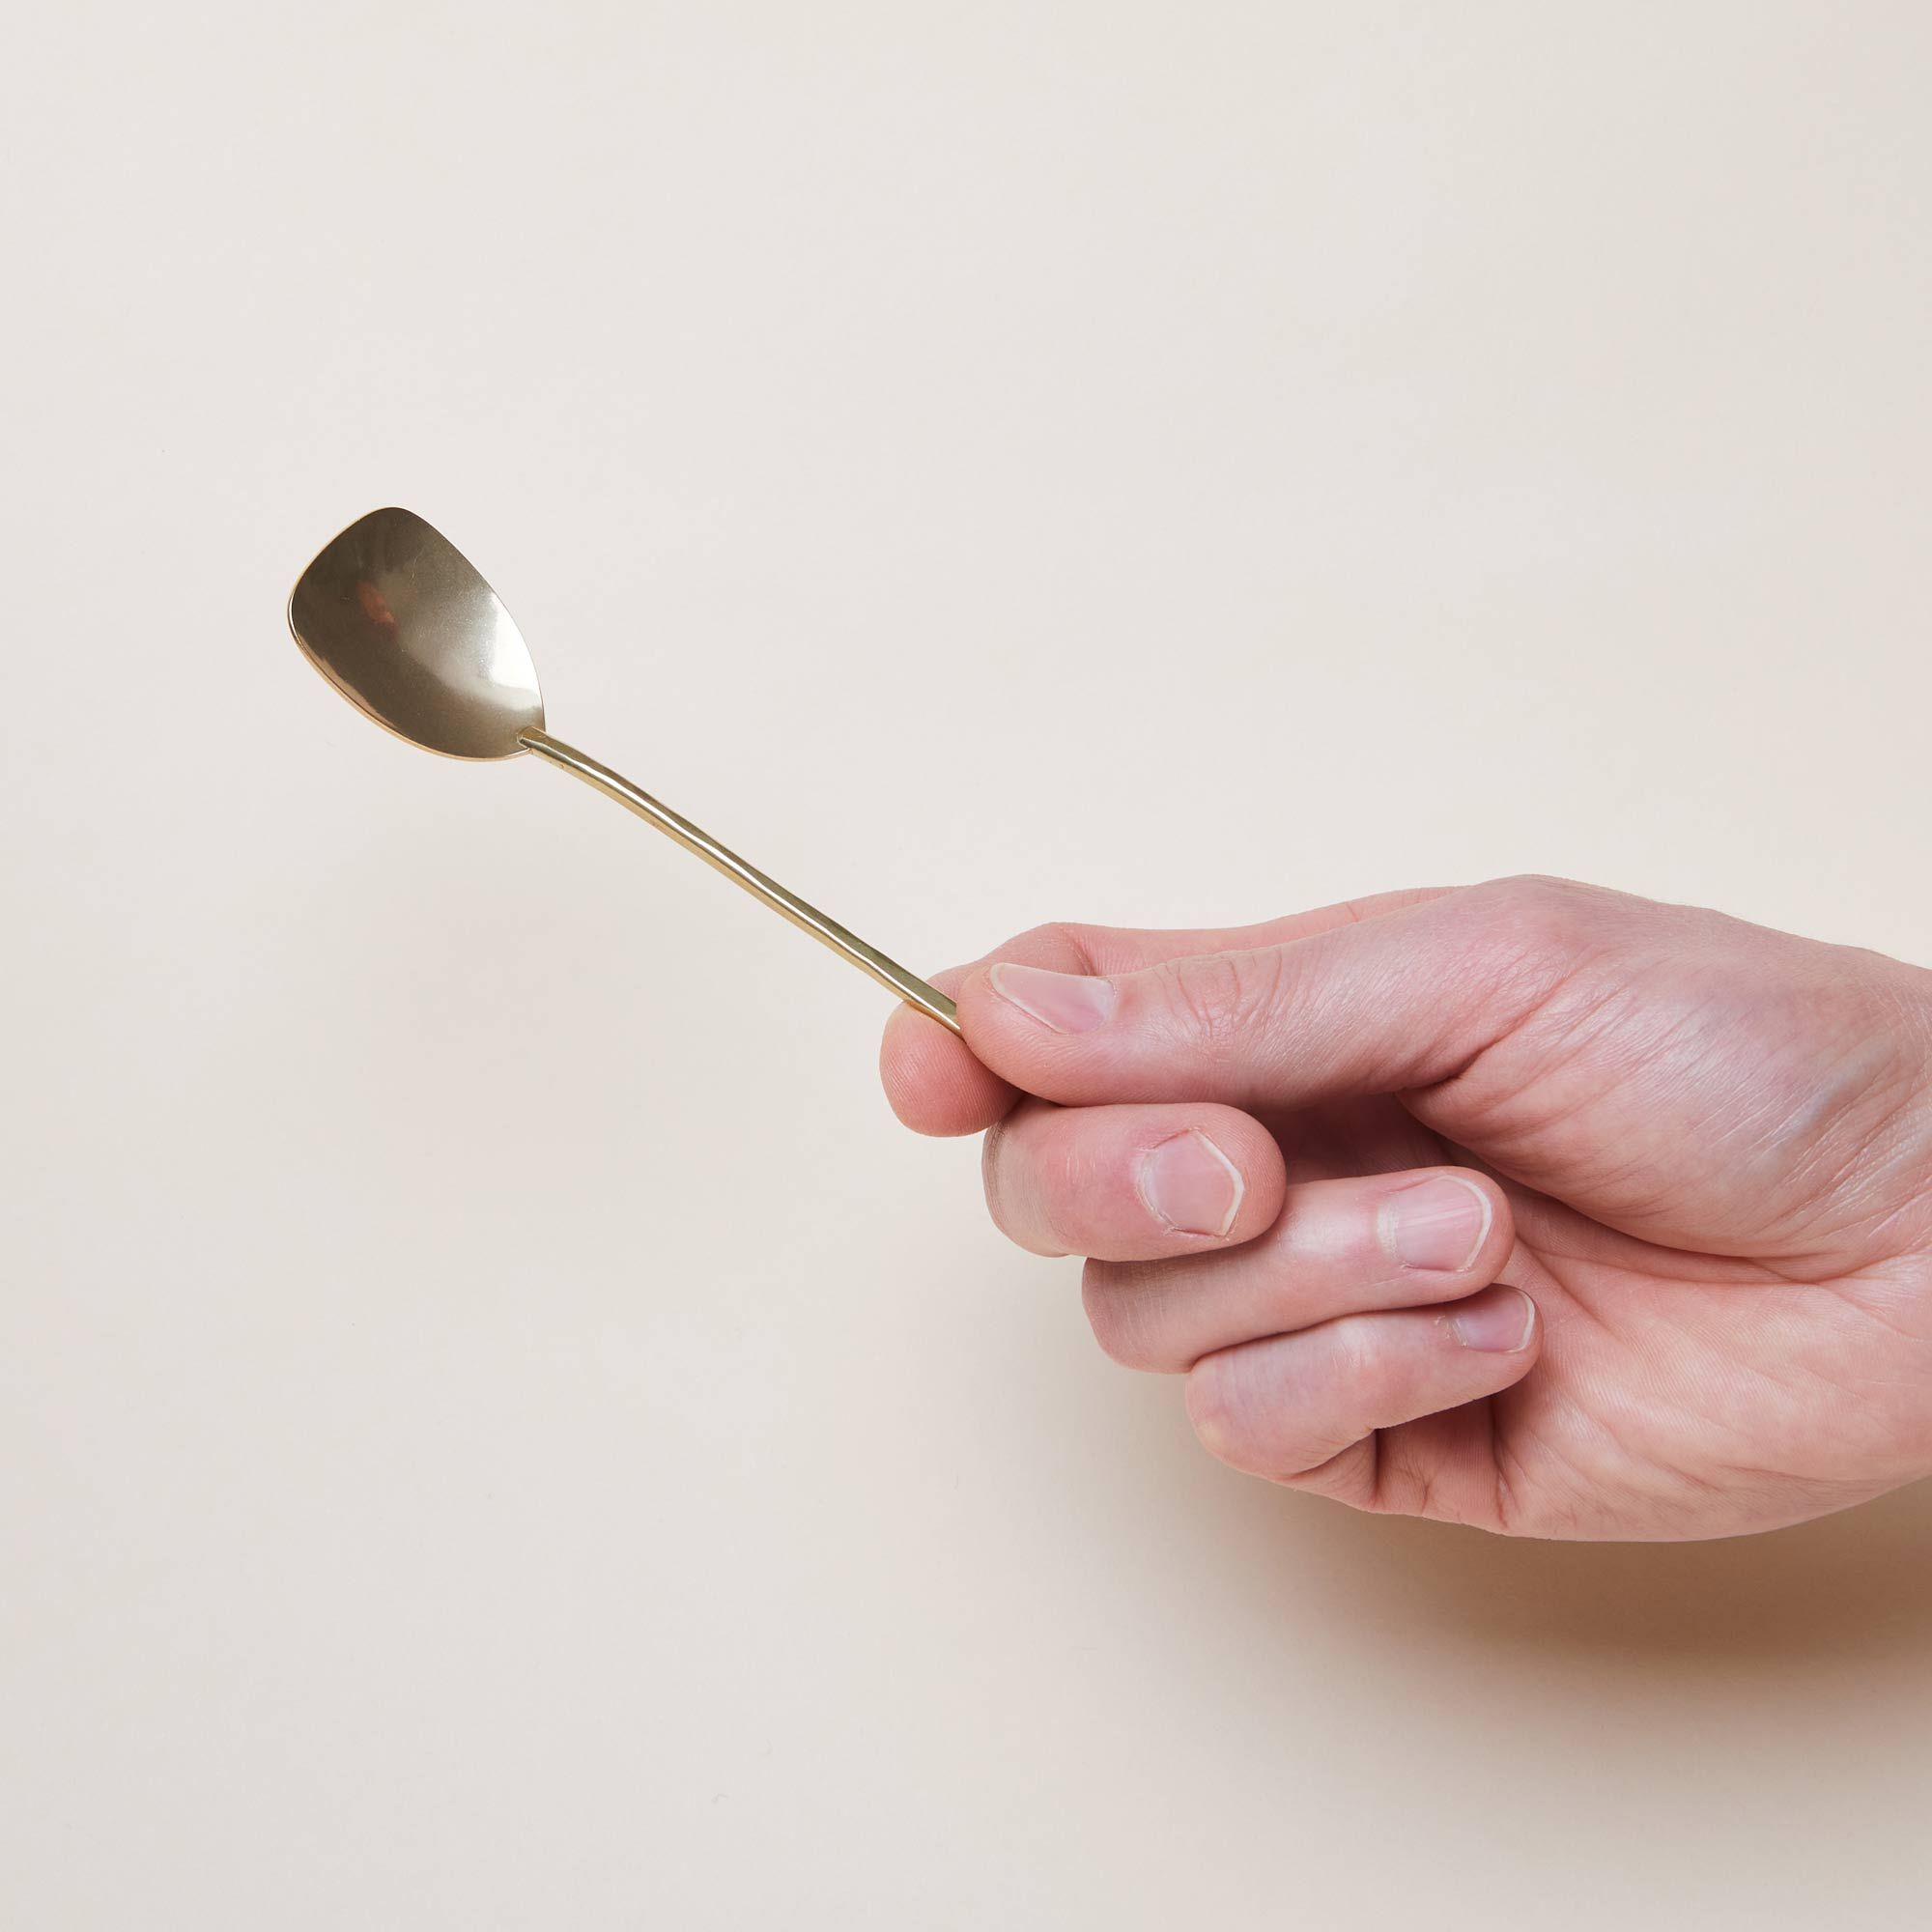 A hand holds a brass spoon with a flared and squared-off bowl attached to a long, thin brass handle